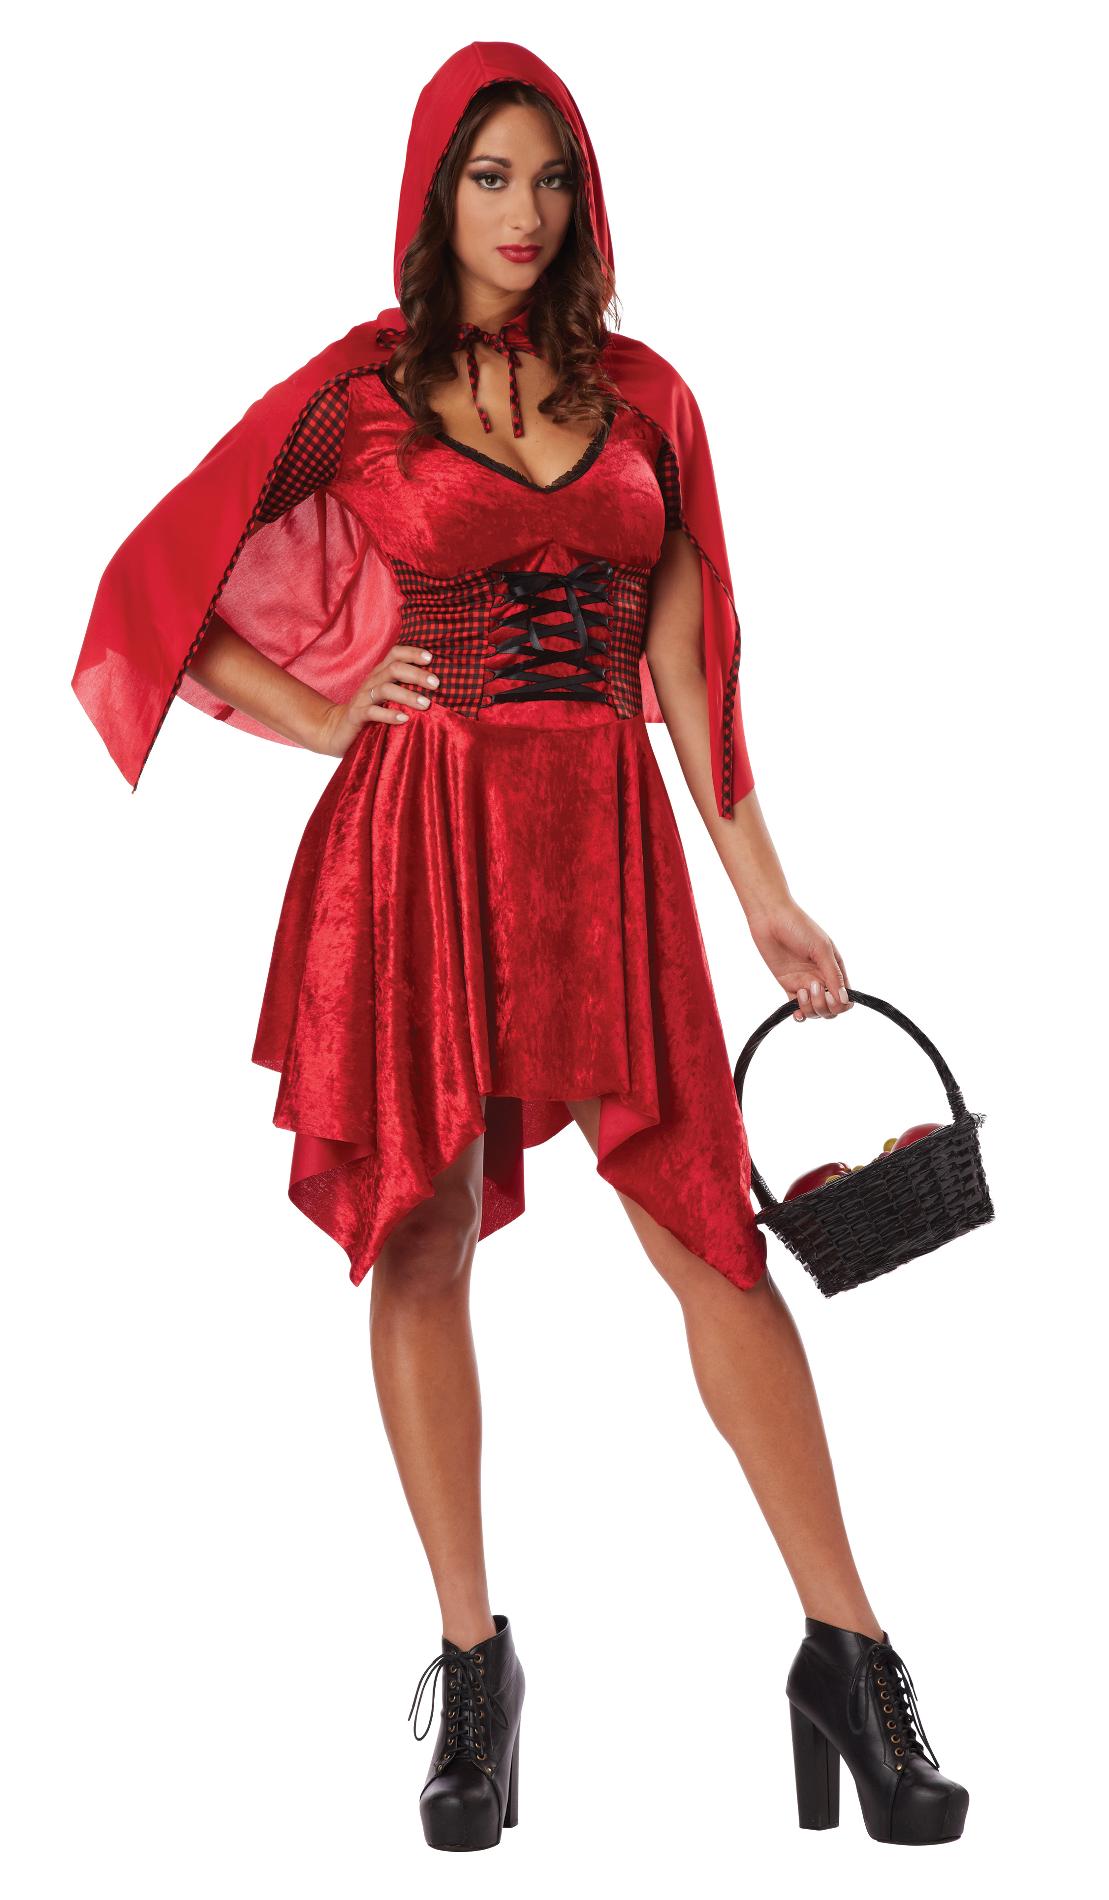 Totally Ghoul Red Riding Hood Women's Halloween Costume